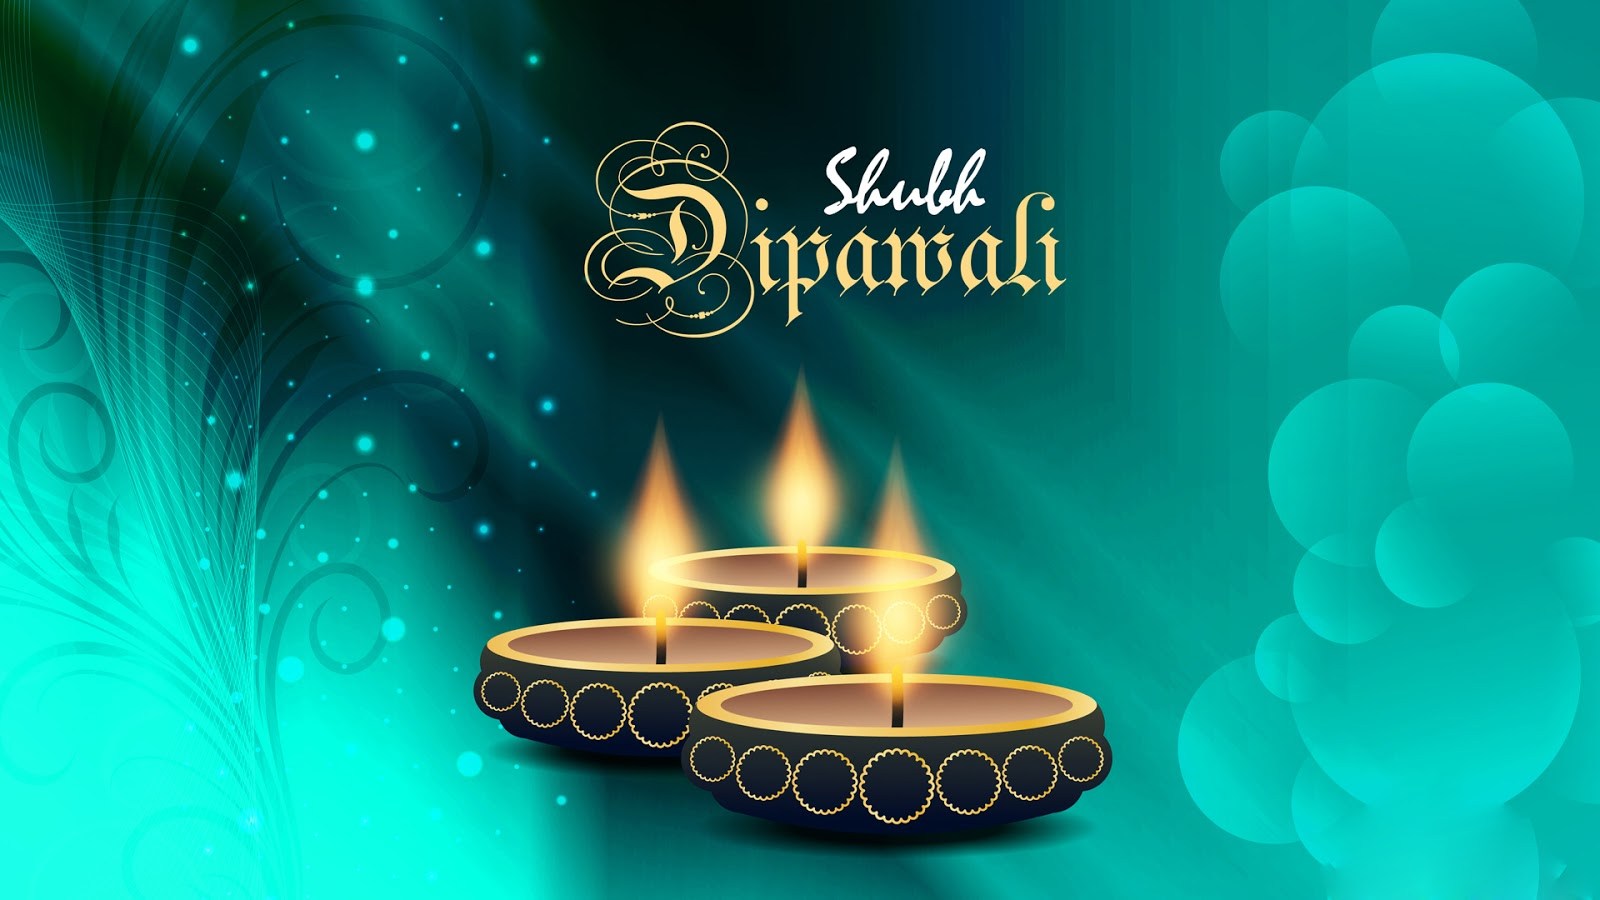 DIWALI 2018! Wishes and Messages for Loved Ones this Diwali